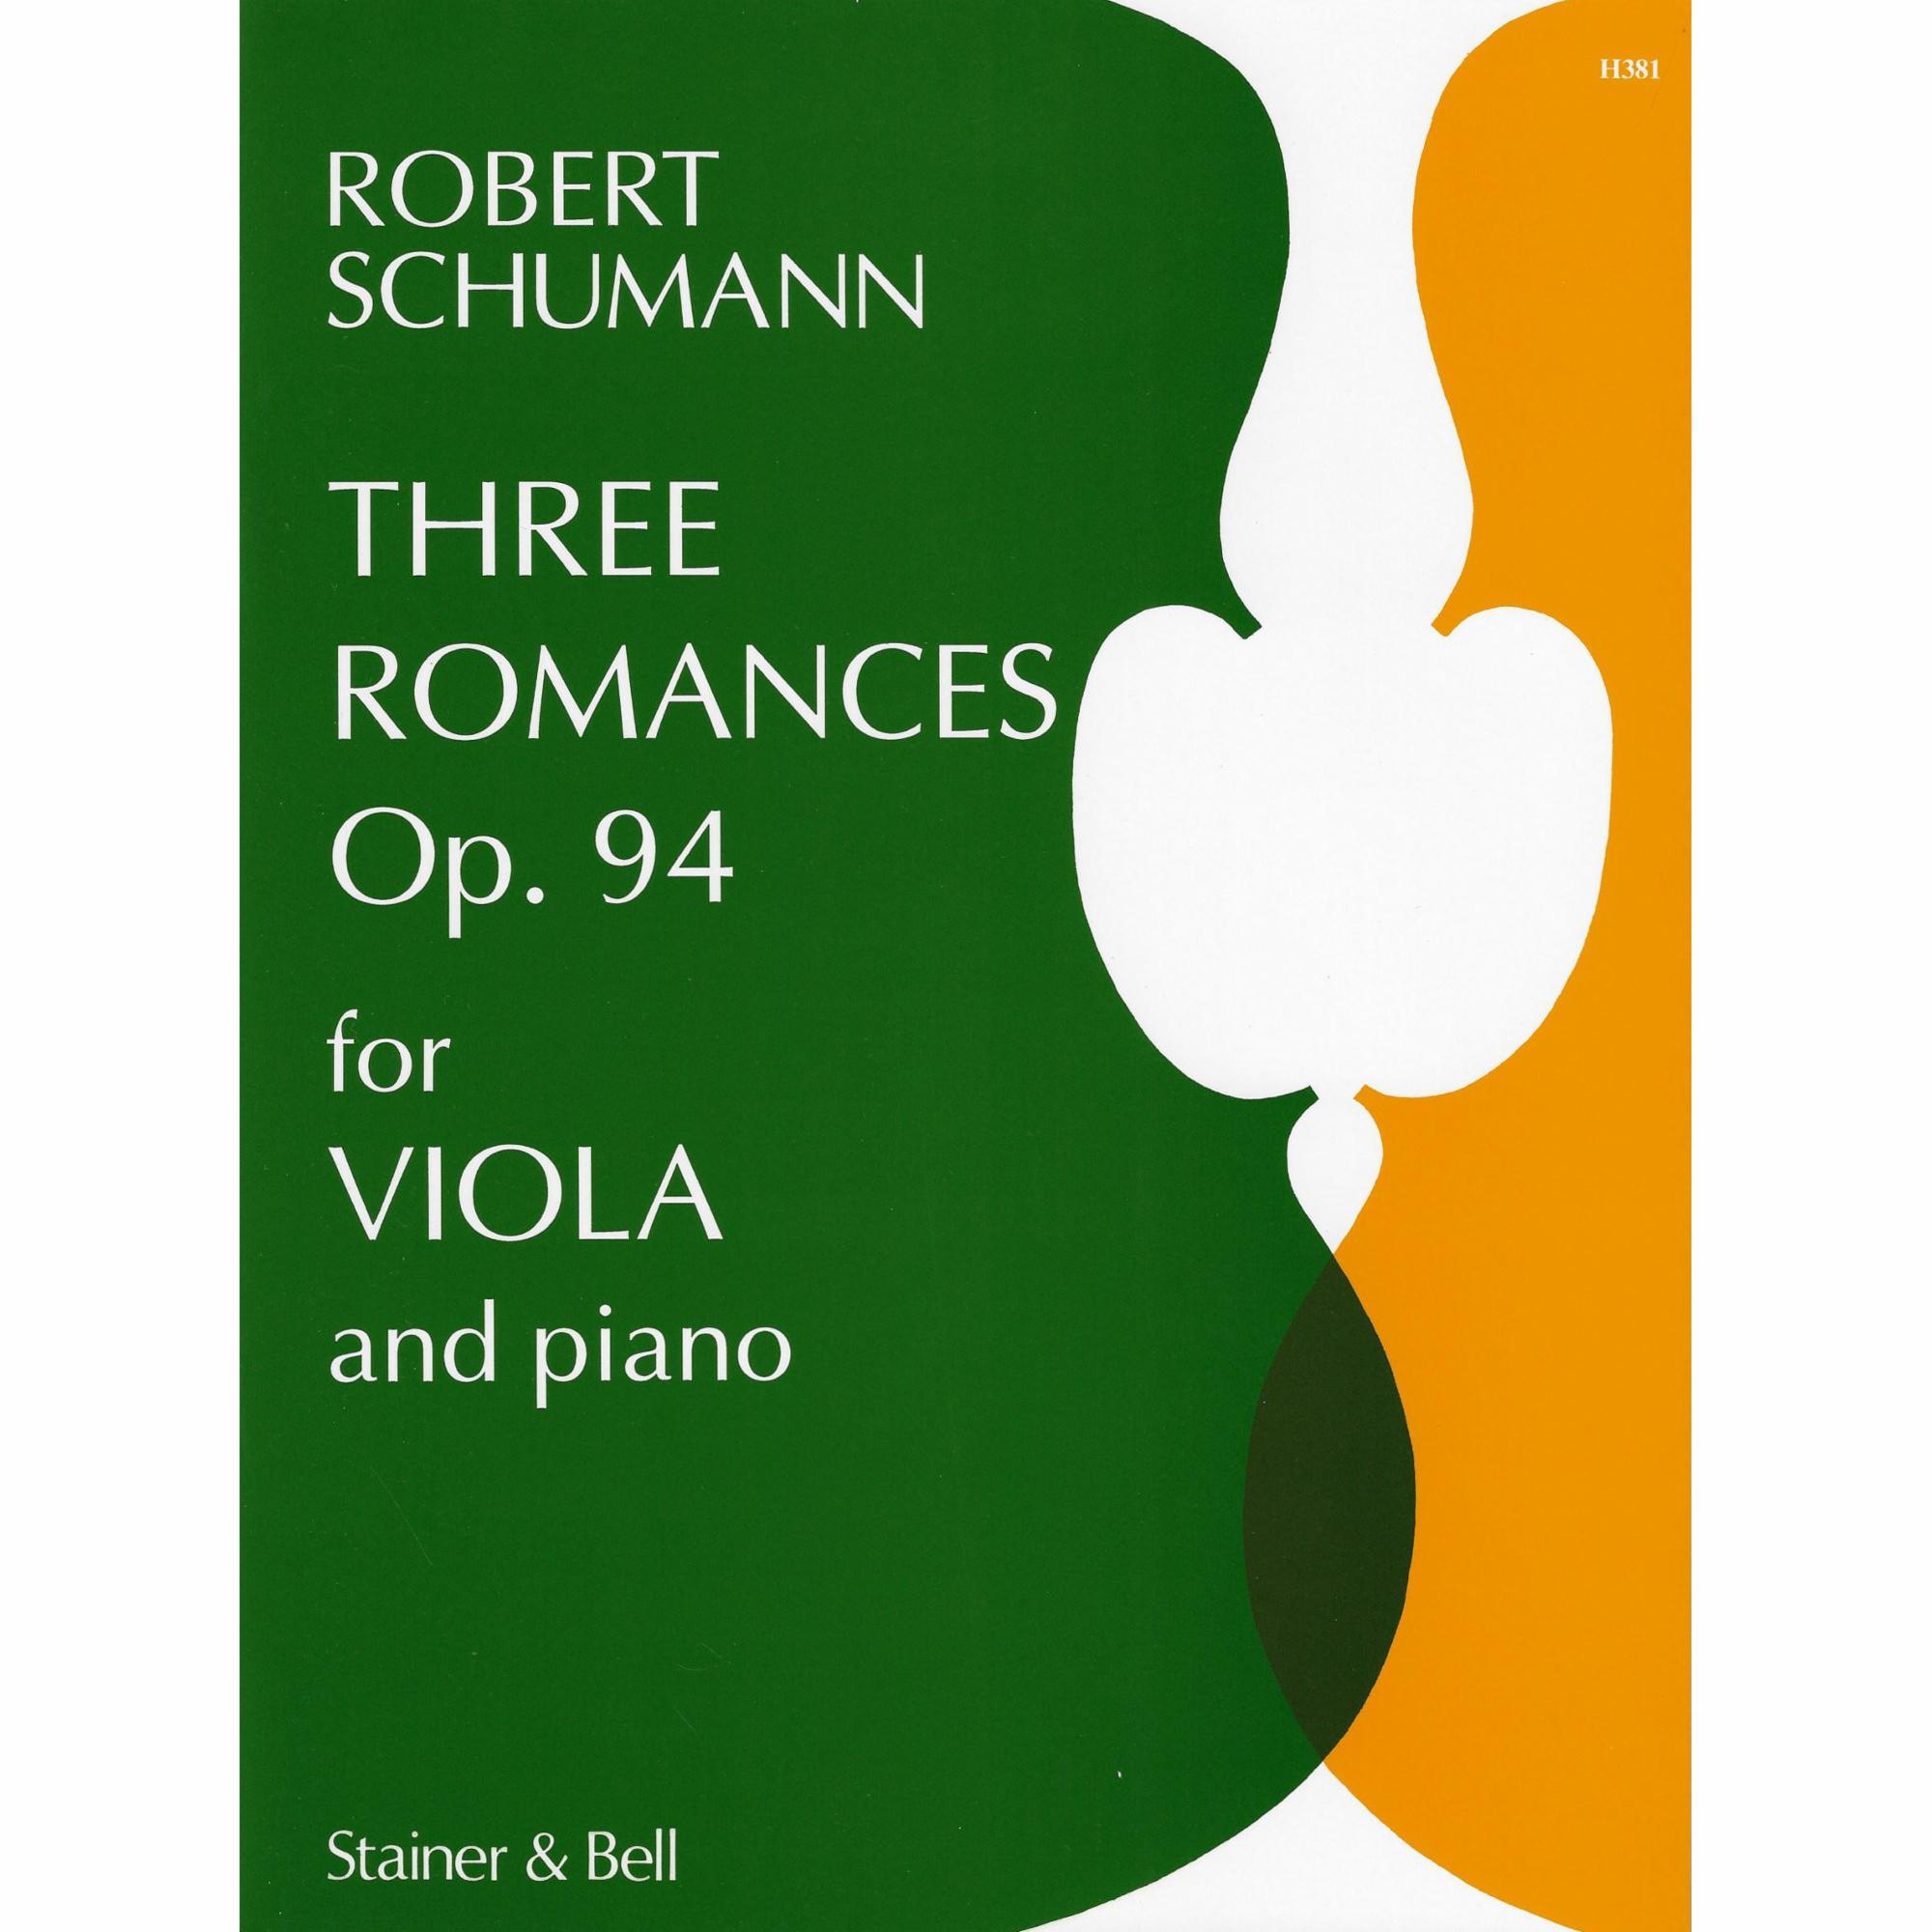 Schumann -- Three Romances, Op. 94 for Viola and Piano